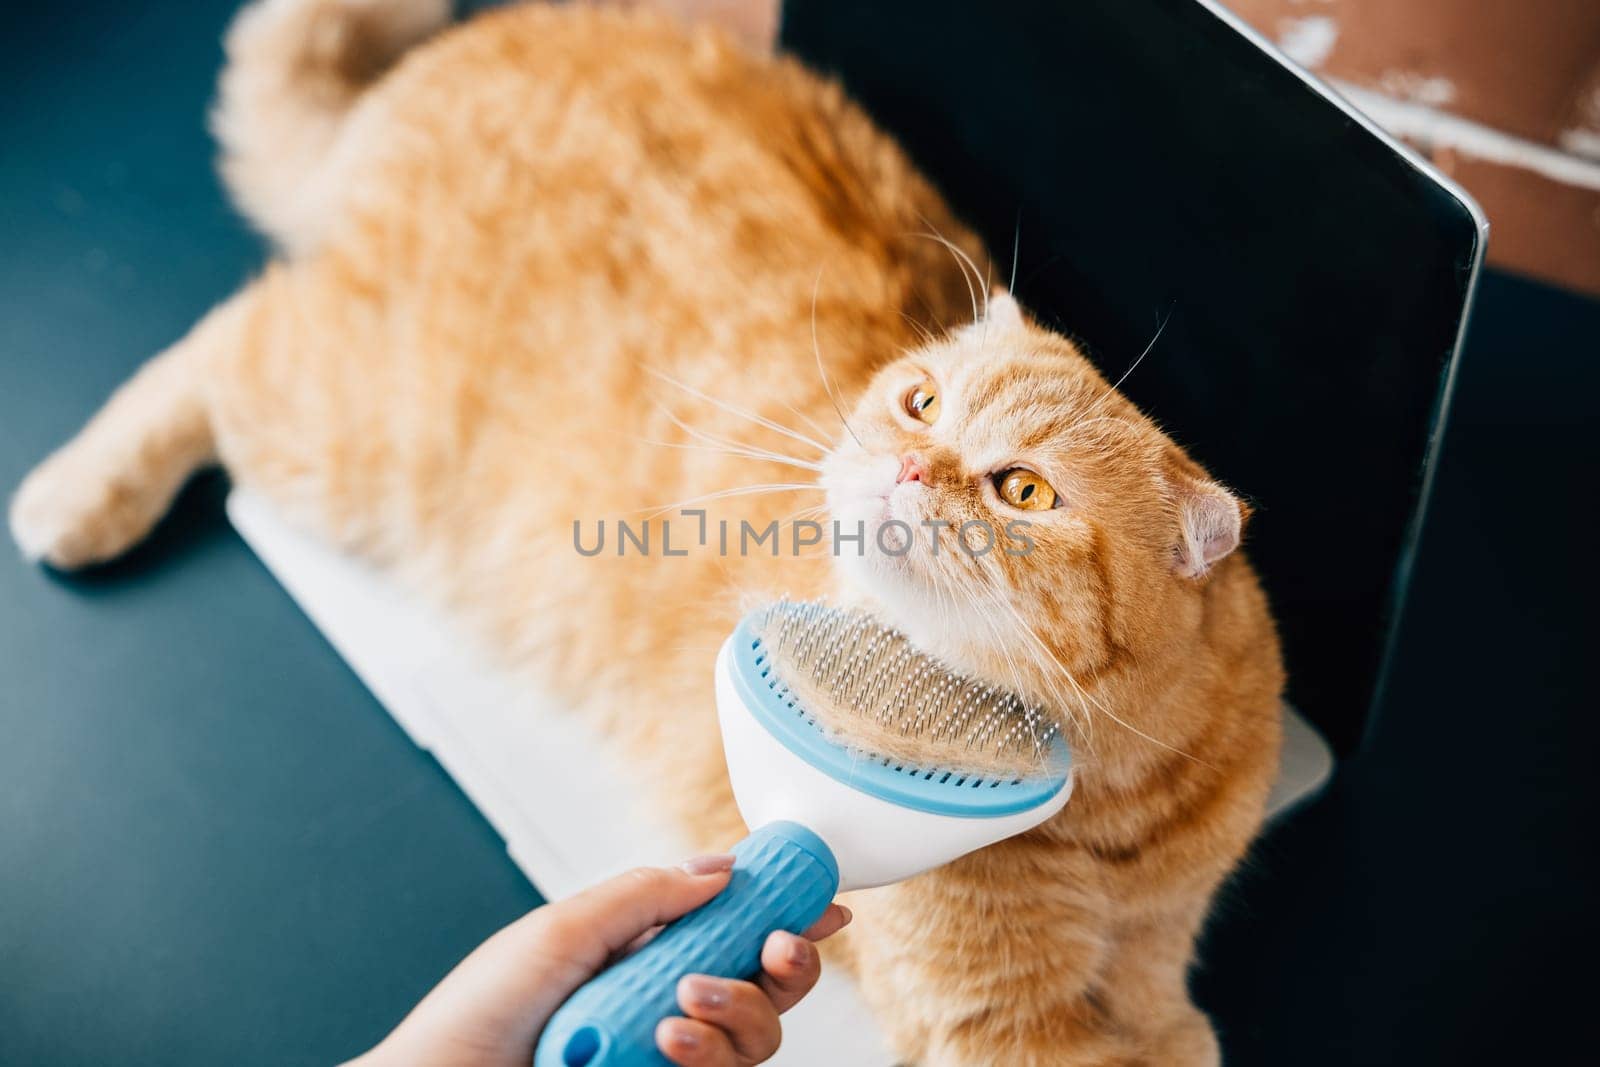 In a cozy home setting, a woman holds her Scottish Fold cat, brushing its fur with care and affection. Their owner-pet bond is evident in this heartwarming portrait. Pat love routine by Sorapop